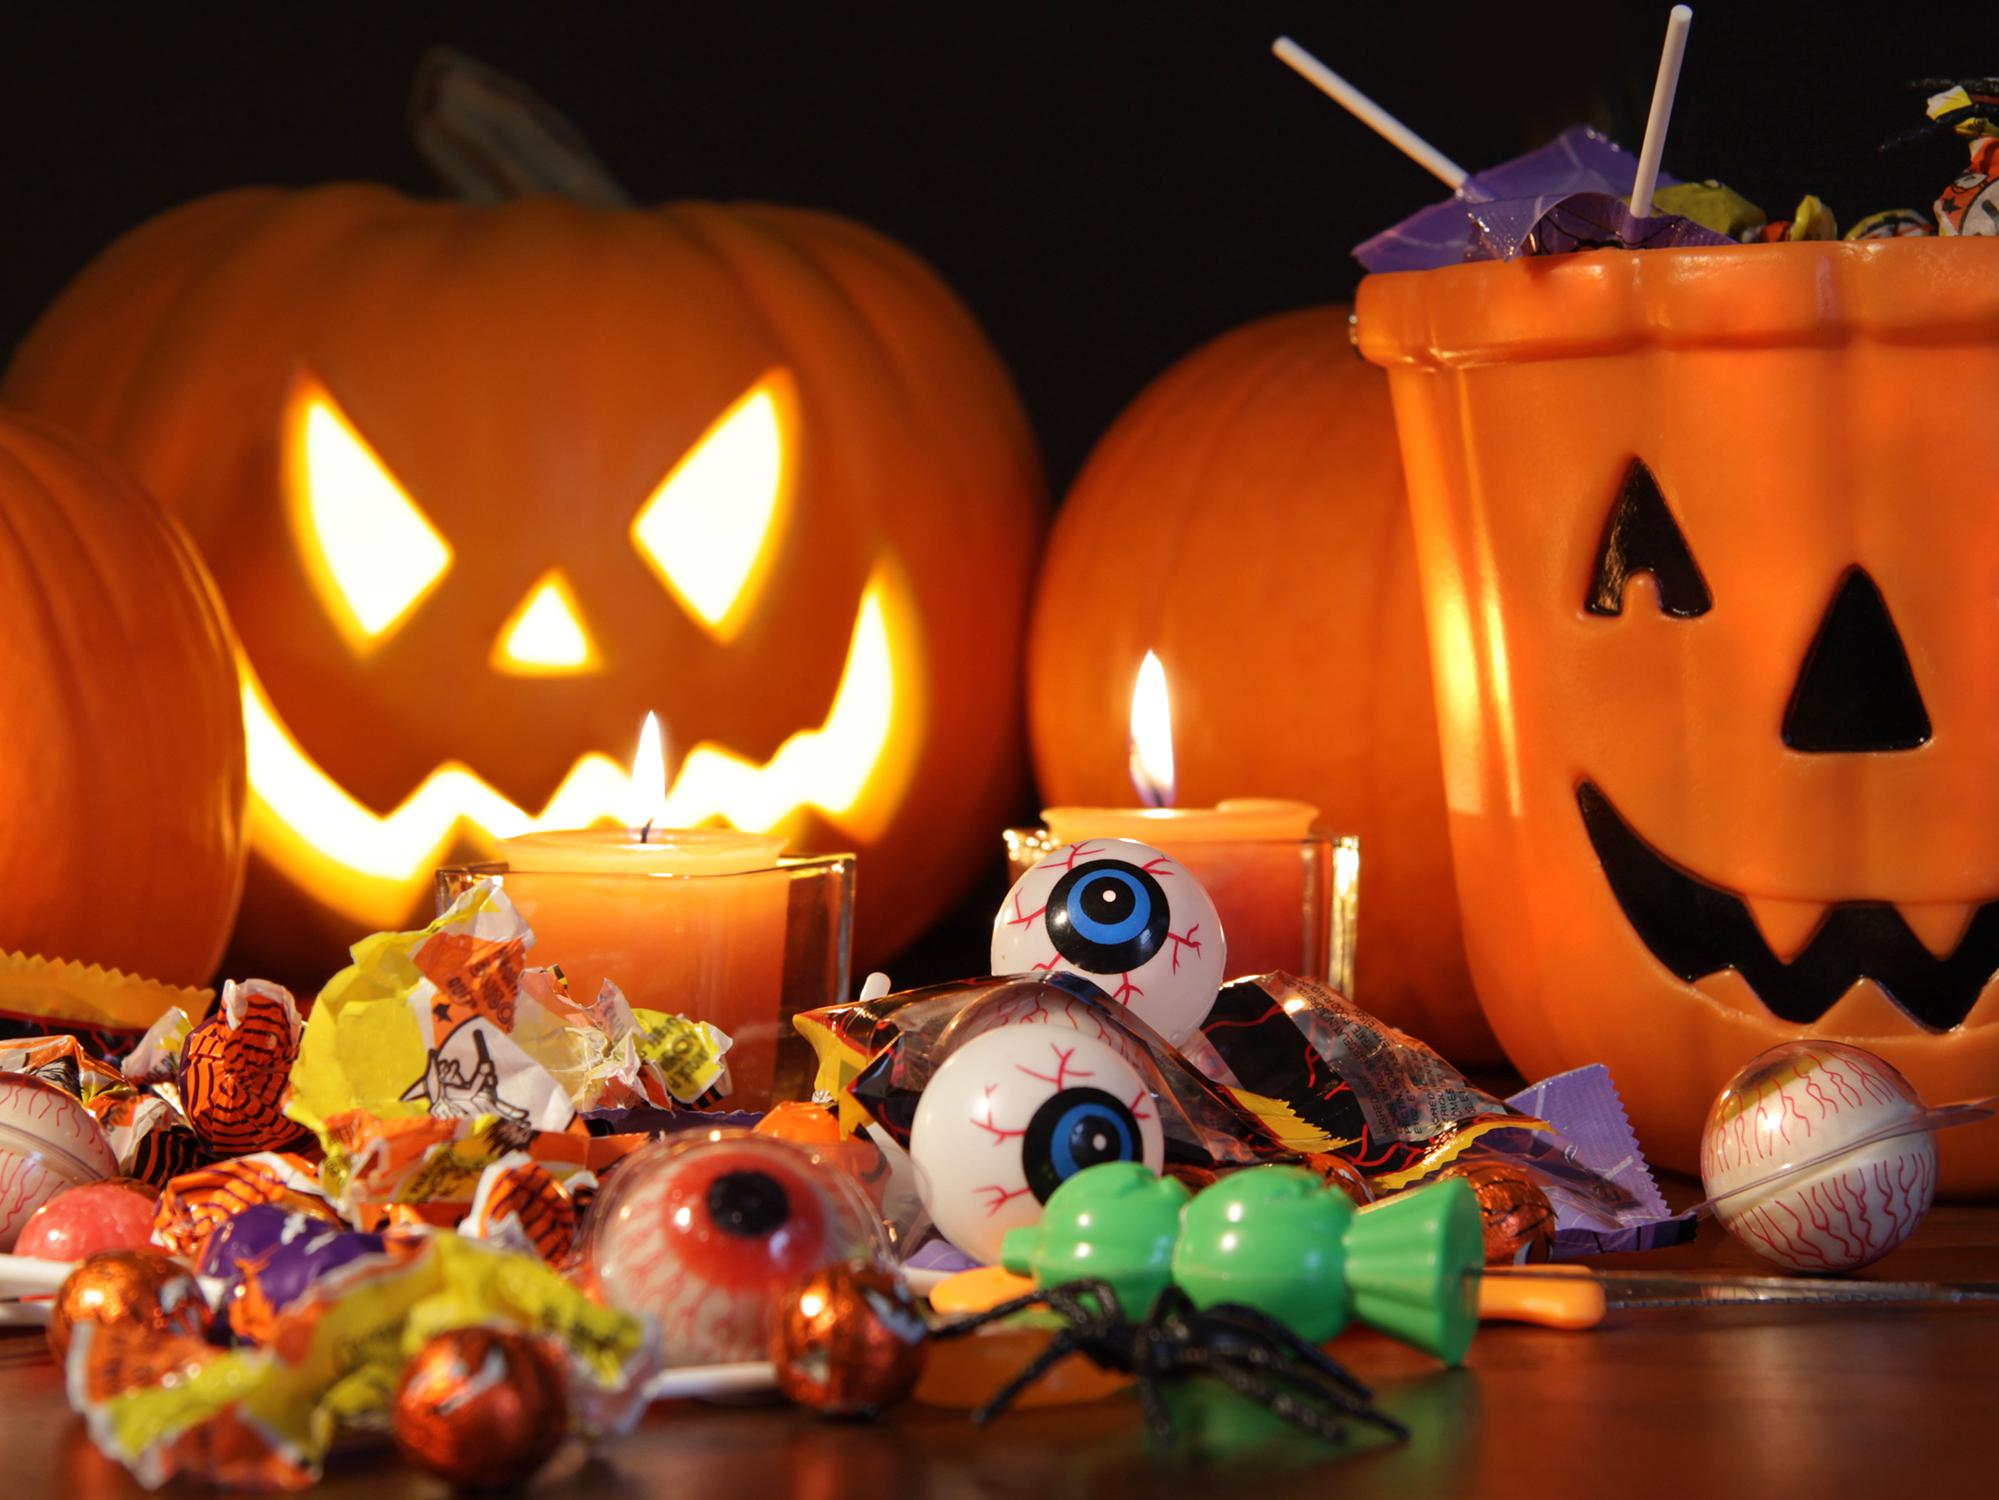 Orange pumpkins and a carved jack-o-lantern sit on a table behind a smiling ceramic jack-o-lantern candy dish. Toys, candy and candles are displayed in front of the pumpkins.